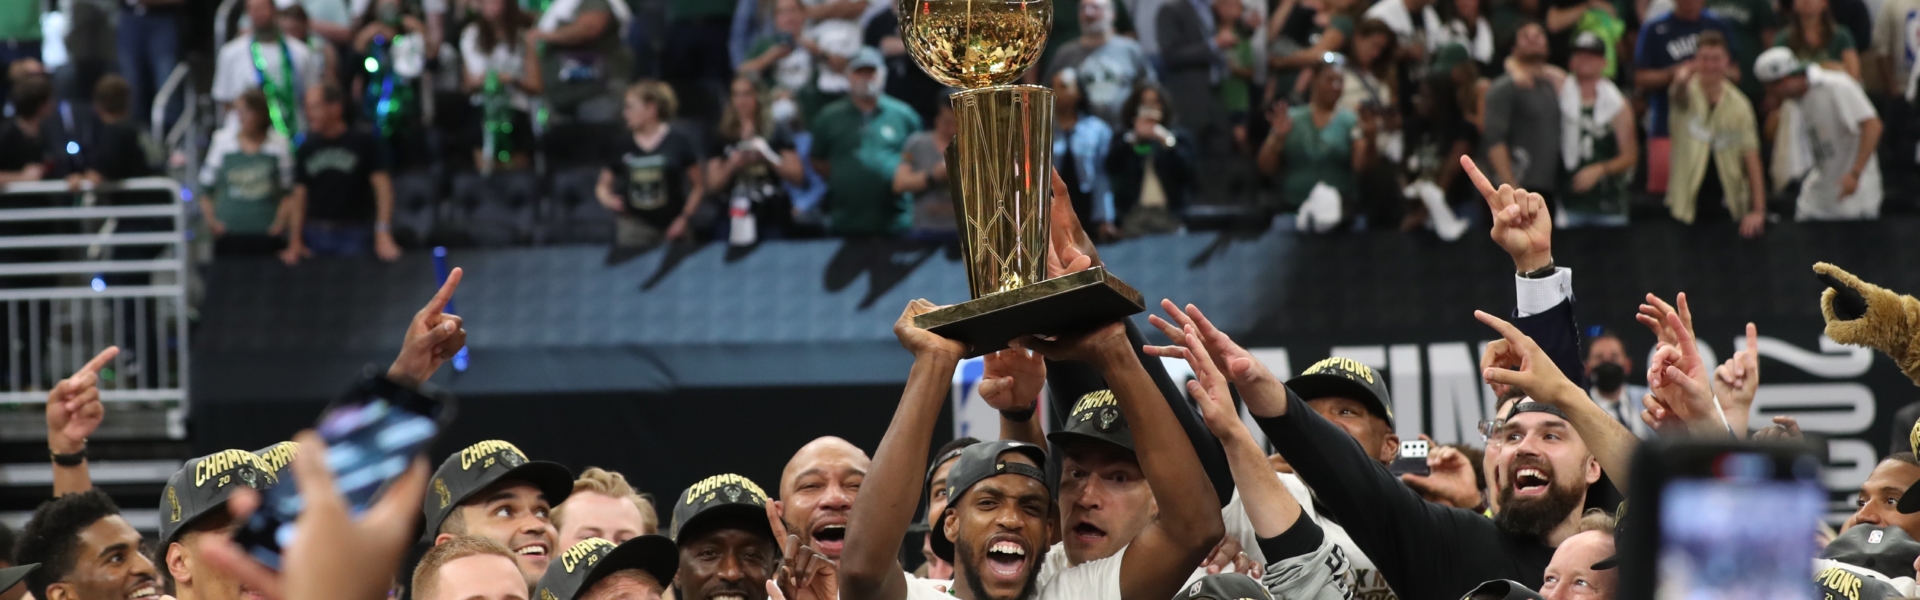 Tiffany & Co.: Tiffany & Co. Congratulates The Milwaukee Bucks, Winners Of  The NBA Finals 2021 And Recipients Of The Larry O'Brien Trophy - Luxferity